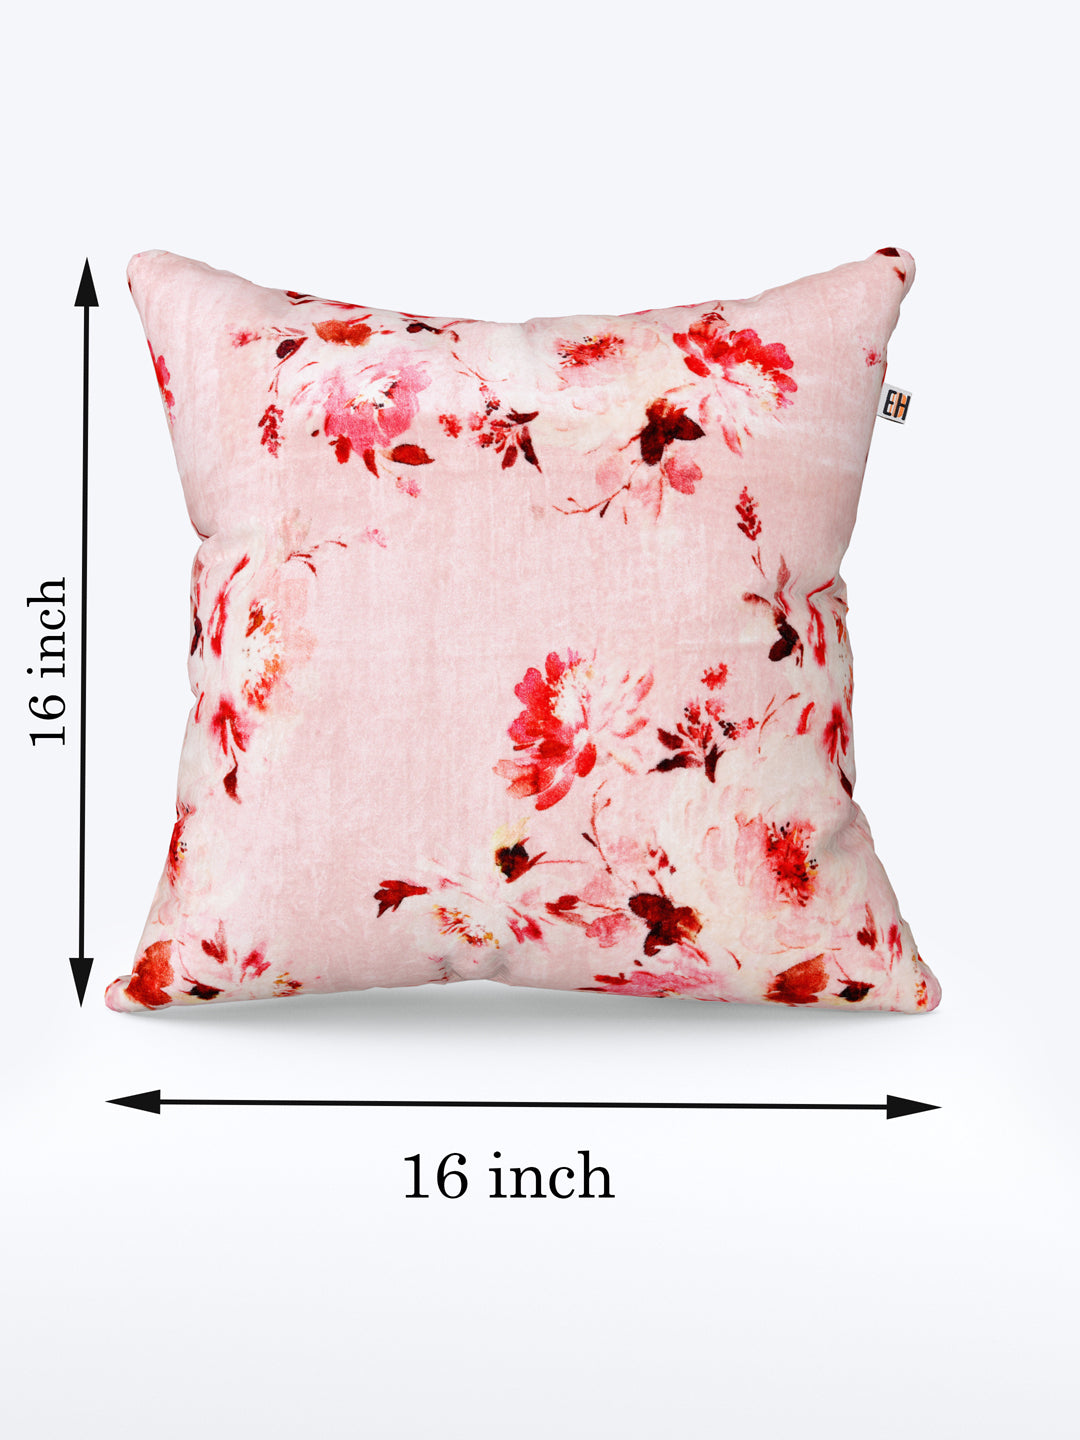 Pink & Mint Set of 2 water color based floral cushion covers